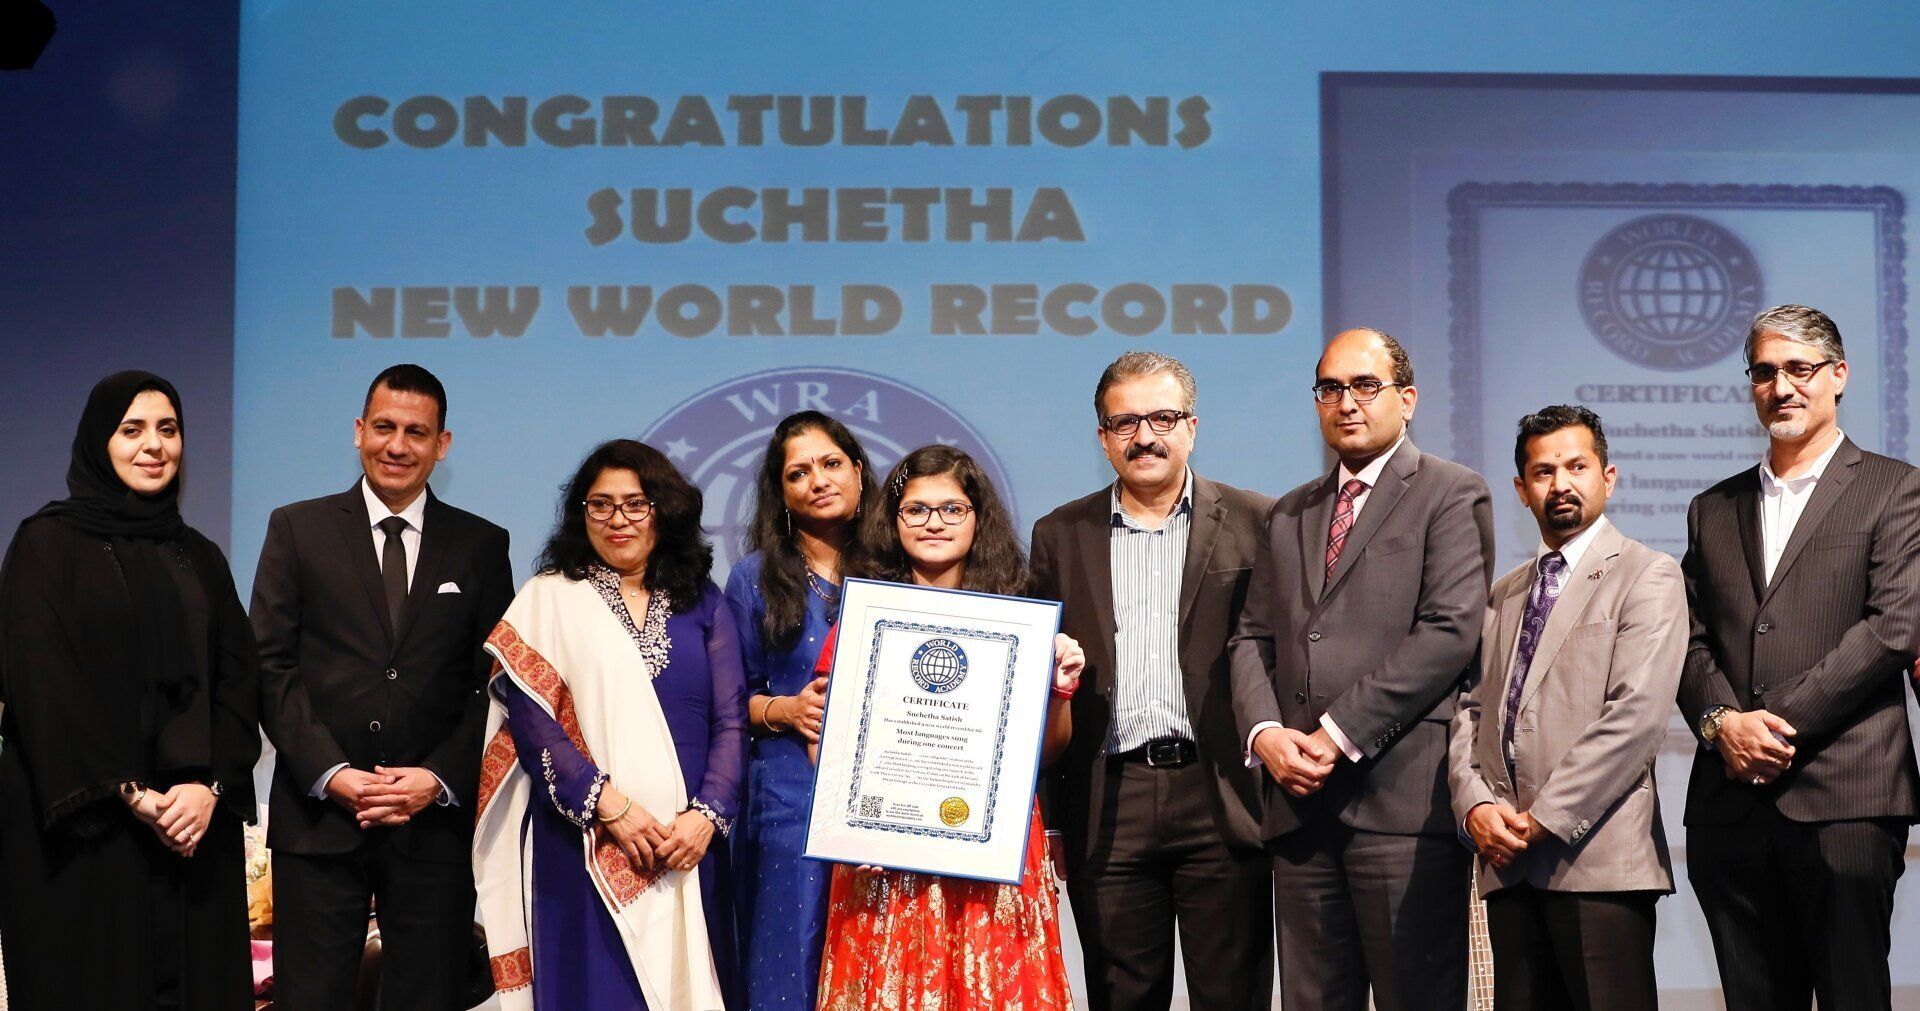  Most Languages Sung during one Concert: world record set by Suchetha Satish (VIDEO)